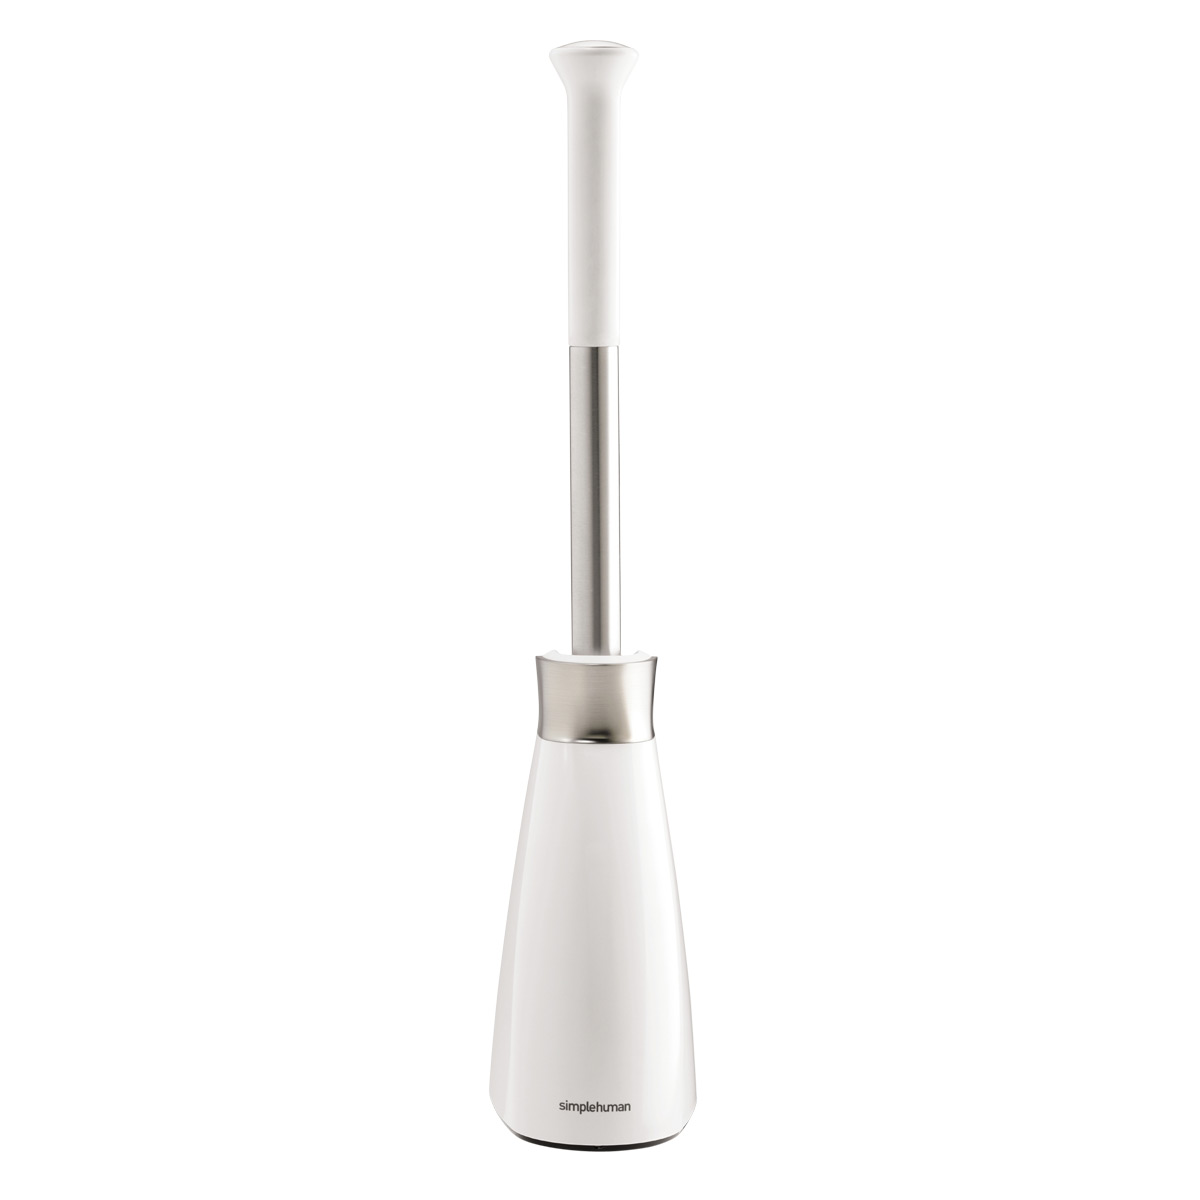 https://www.containerstore.com/catalogimages/378527/10061723-Magnetic-Toilet-Brush-VEN1.jpg